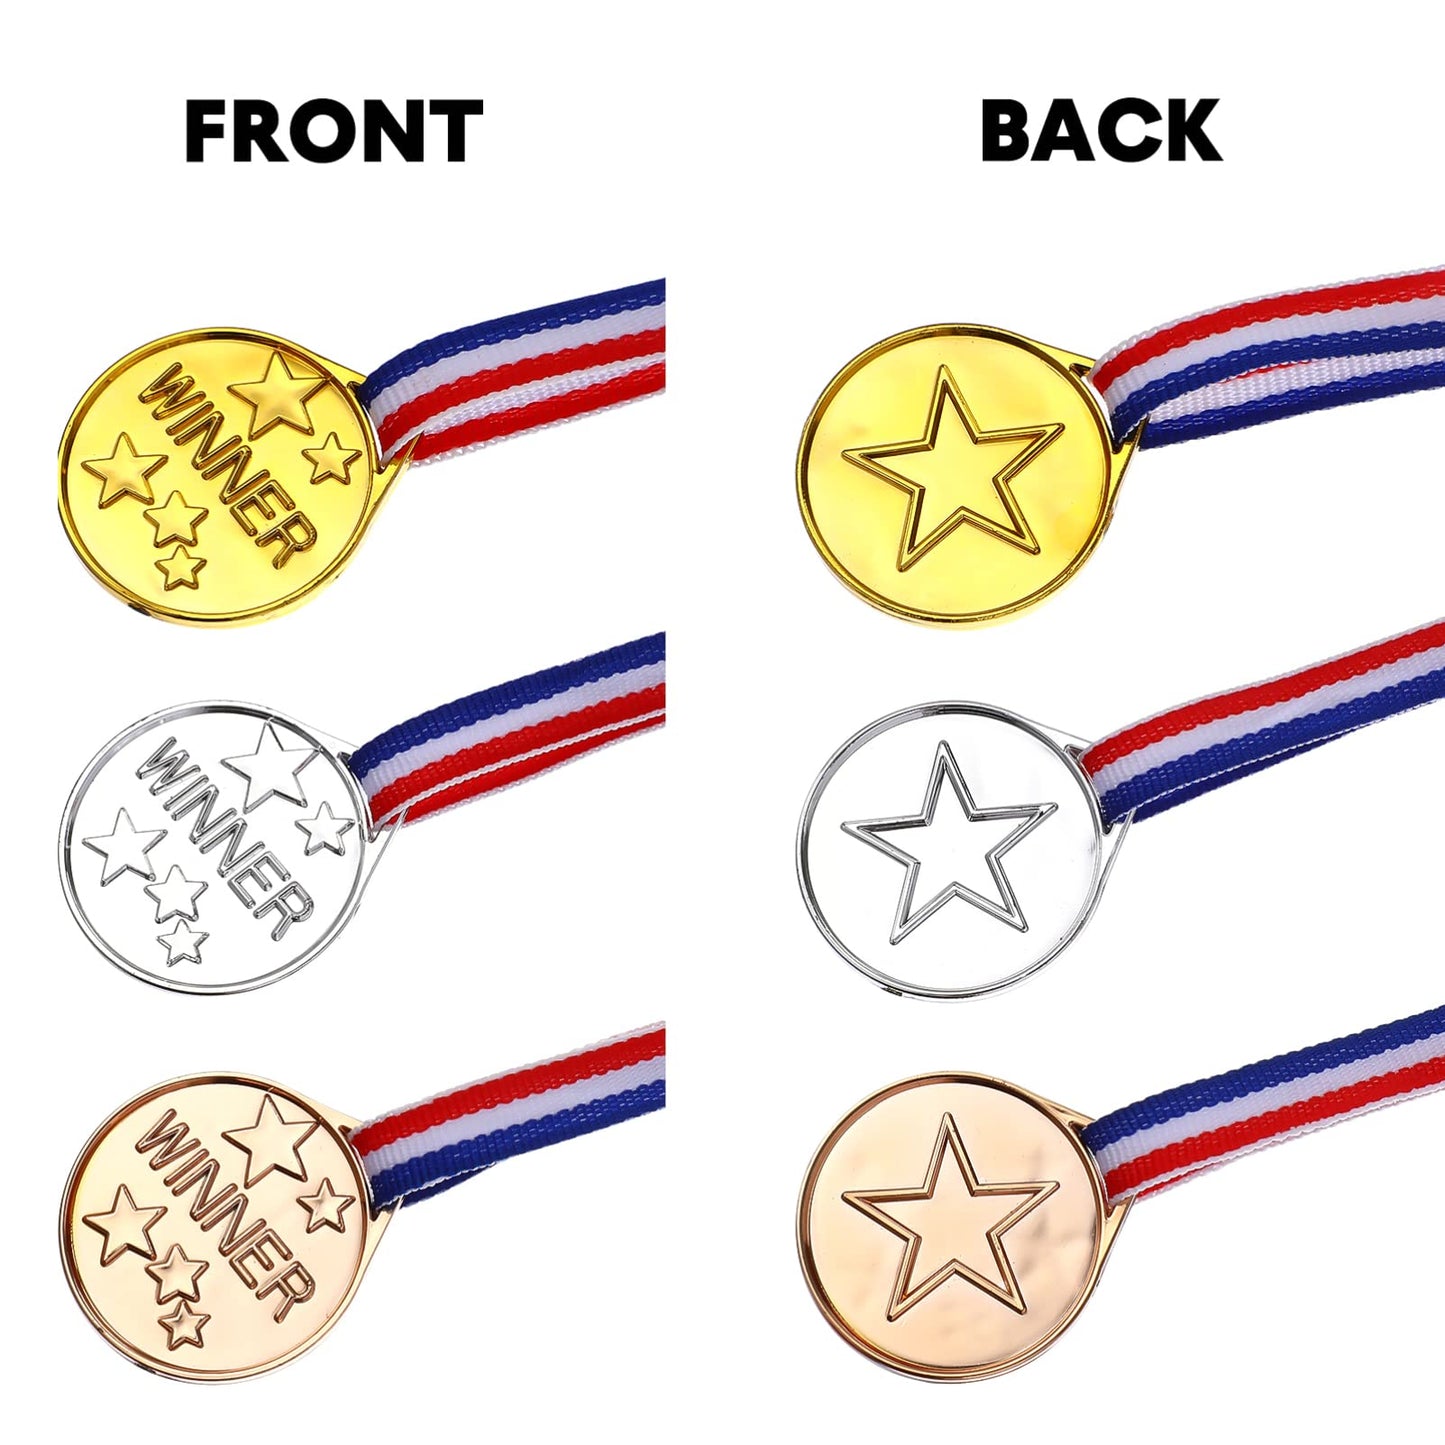 12Pcs Winner Medals, Award Medals for Kids Adults, Medal Set of Gold, Silver, Bronze Medals, Winner Medals with Ribbon Party Prizes for Sports Competitions, Party Favors